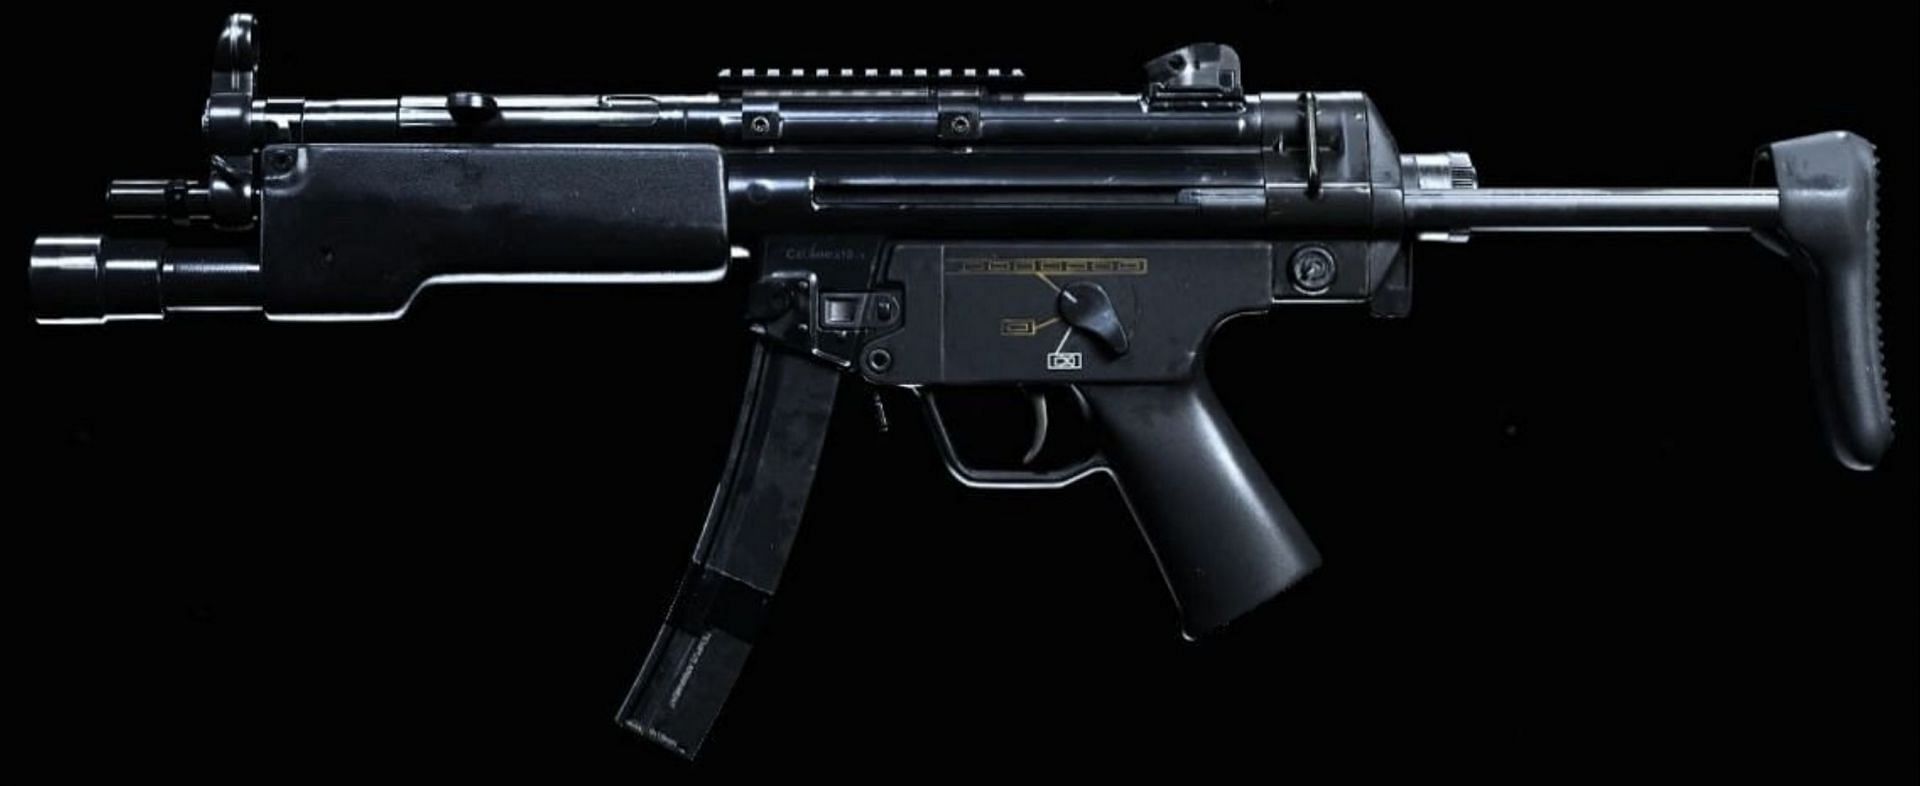 The MP5 from COD: Modern Warfare (Image via Activision)